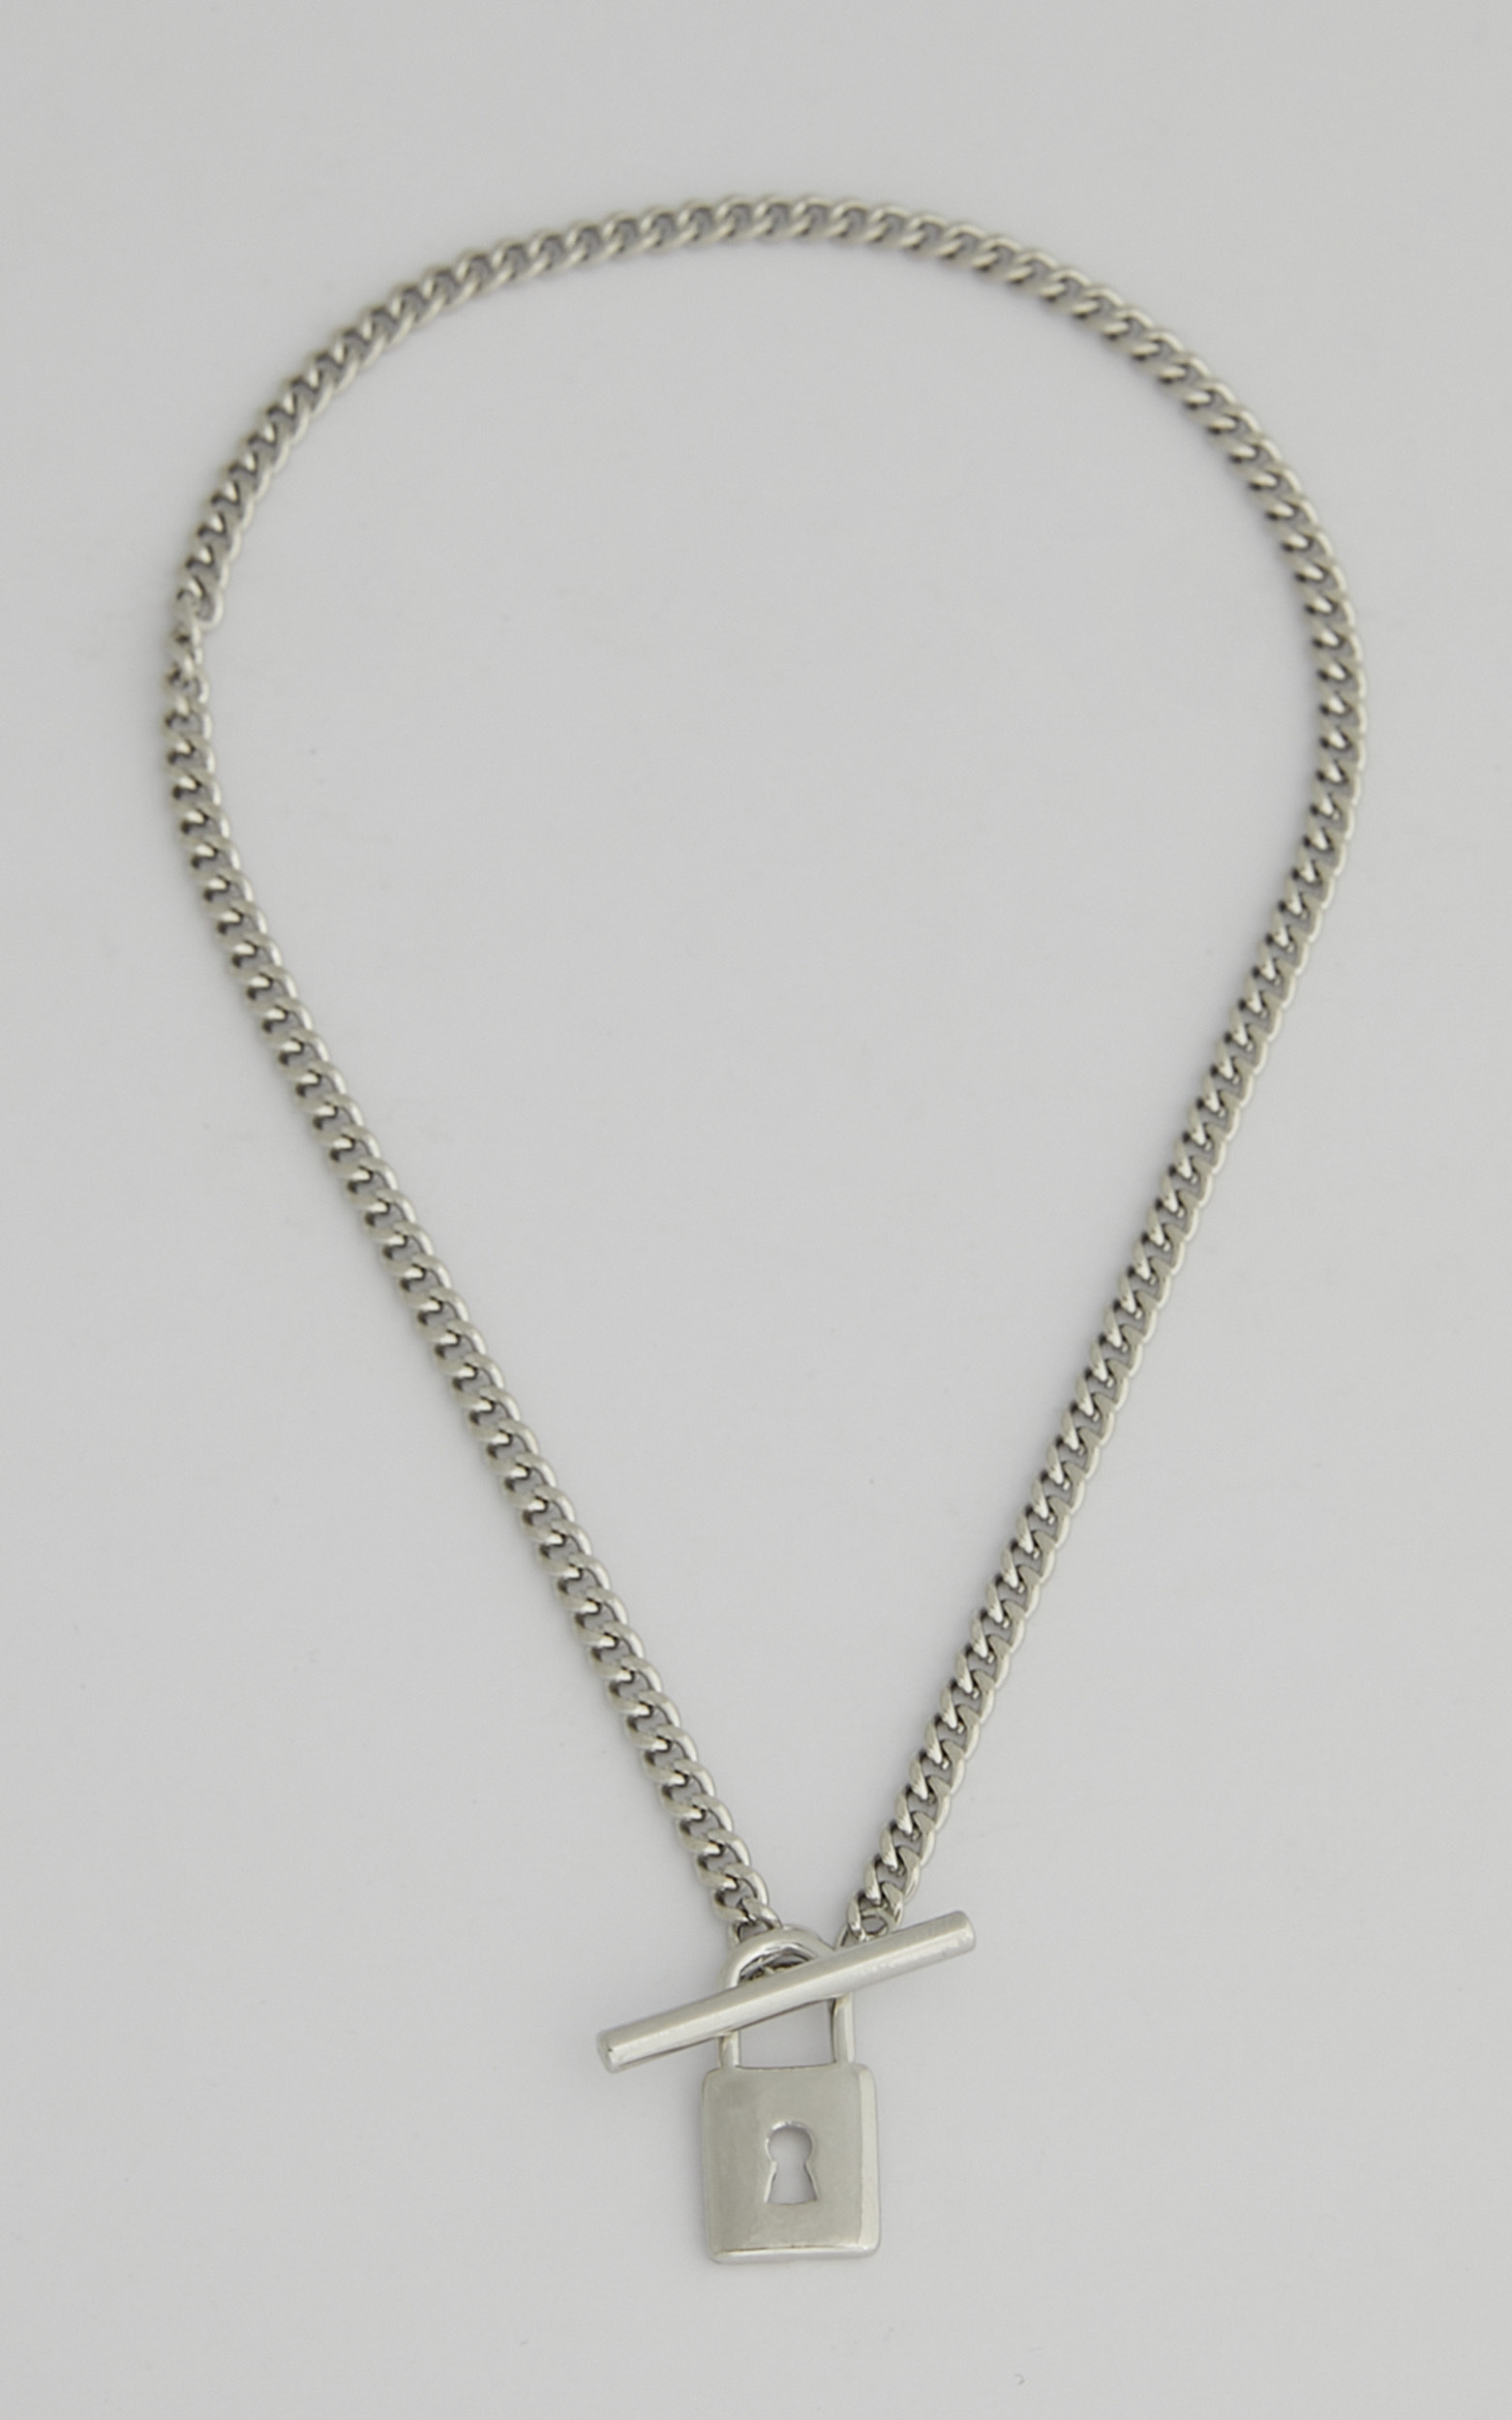 Darby Lock Necklace in Silver - NoSize, SLV1, hi-res image number null